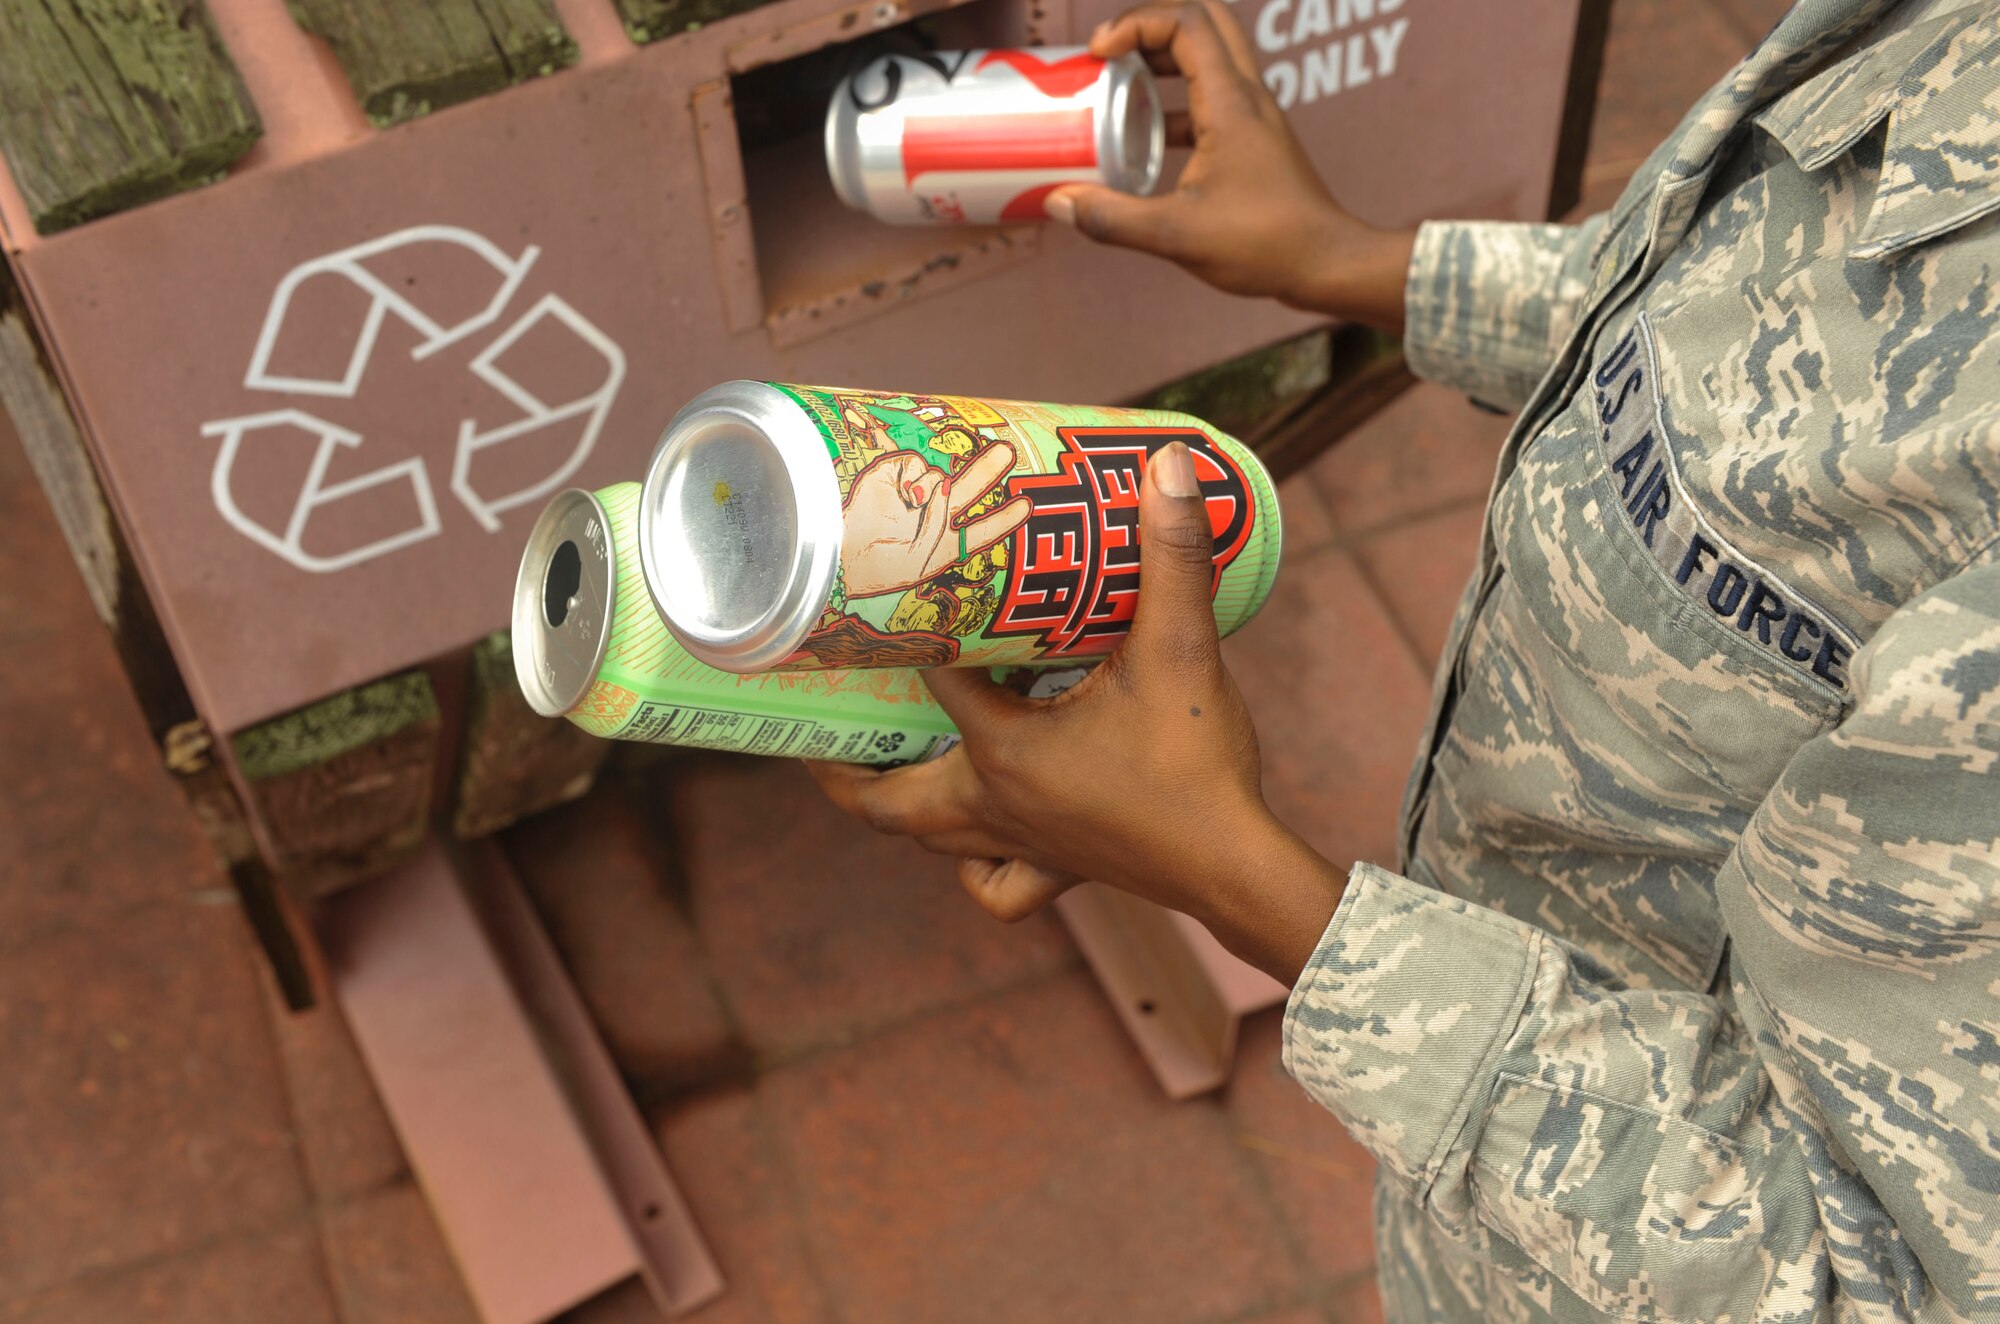 Airmen have several locations on base to recycle. In 2013 Little Rock Air Force Base saved more than $250,000 by recycling. (U.S. Air Force photo by Senior Airman Regina Agoha)